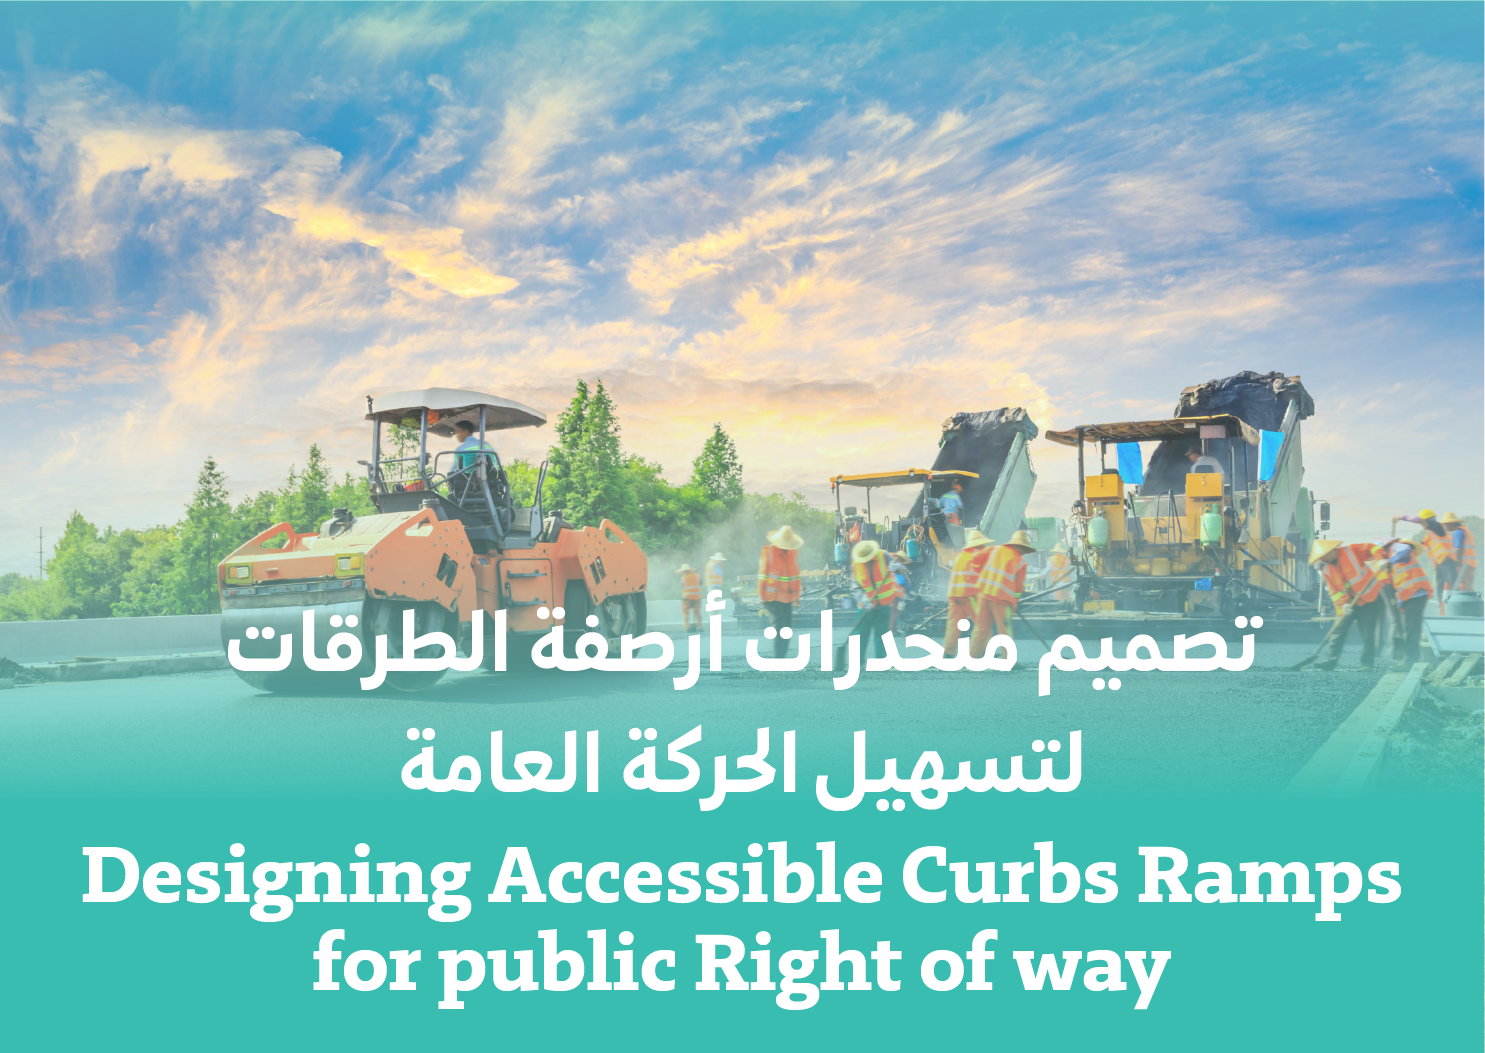 Designing Accessible Curbs Ramps for public Right of way